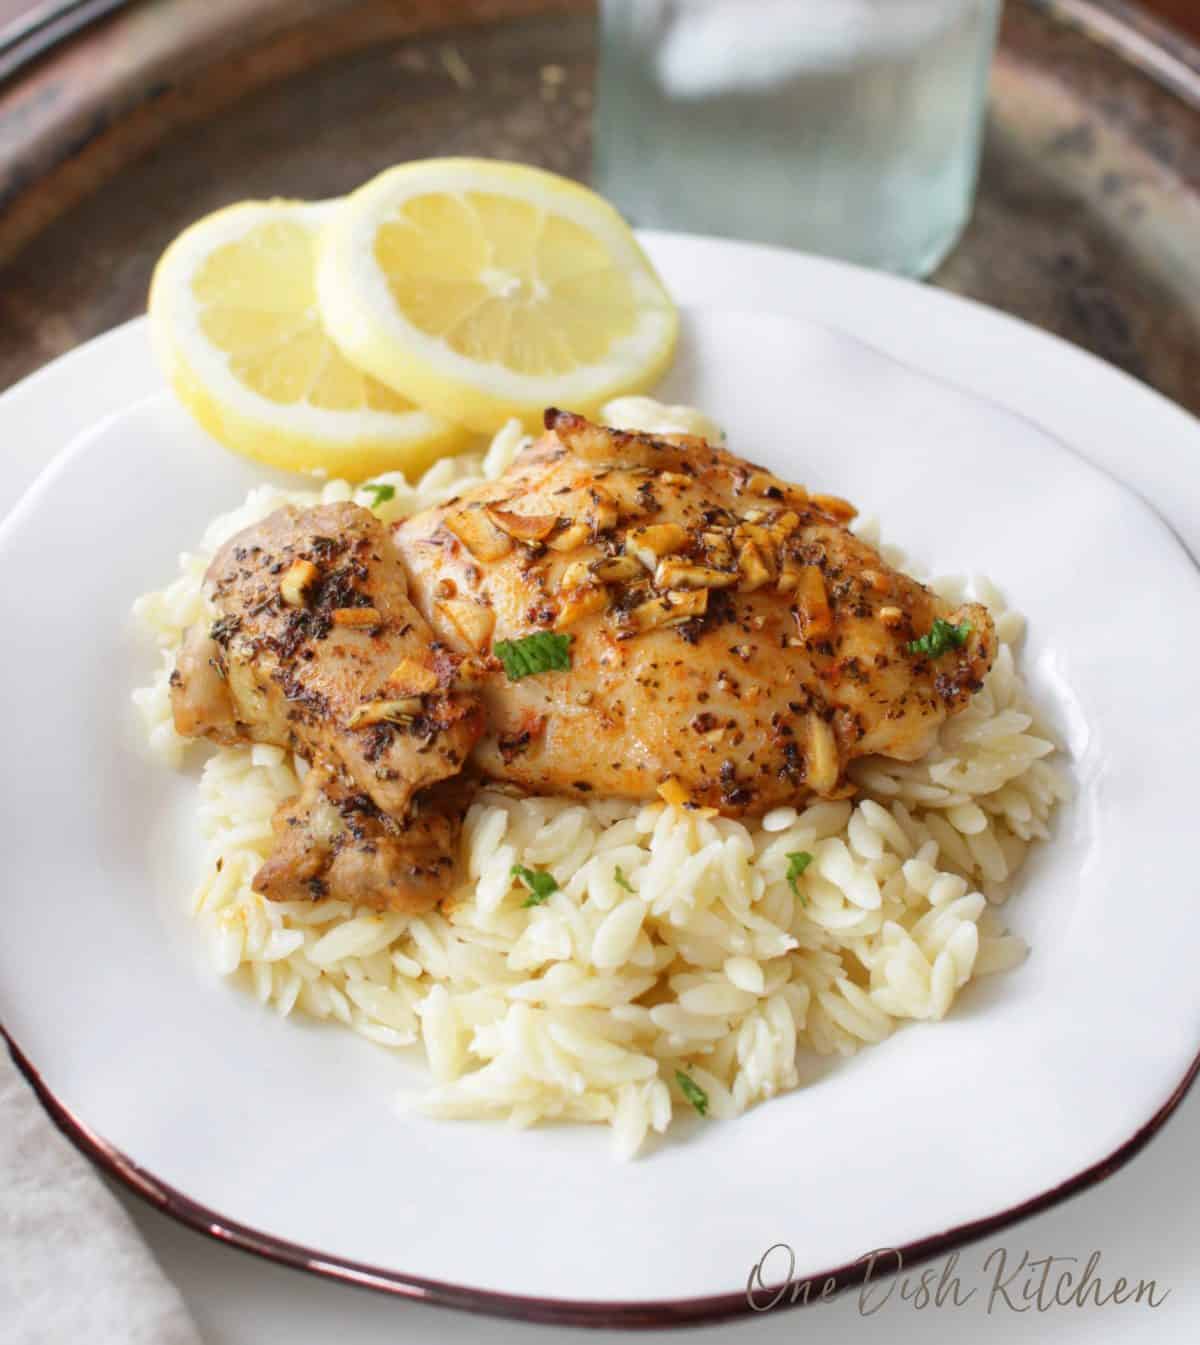 Cooked chicken over orzo pasta with two lemon wheels on a plate